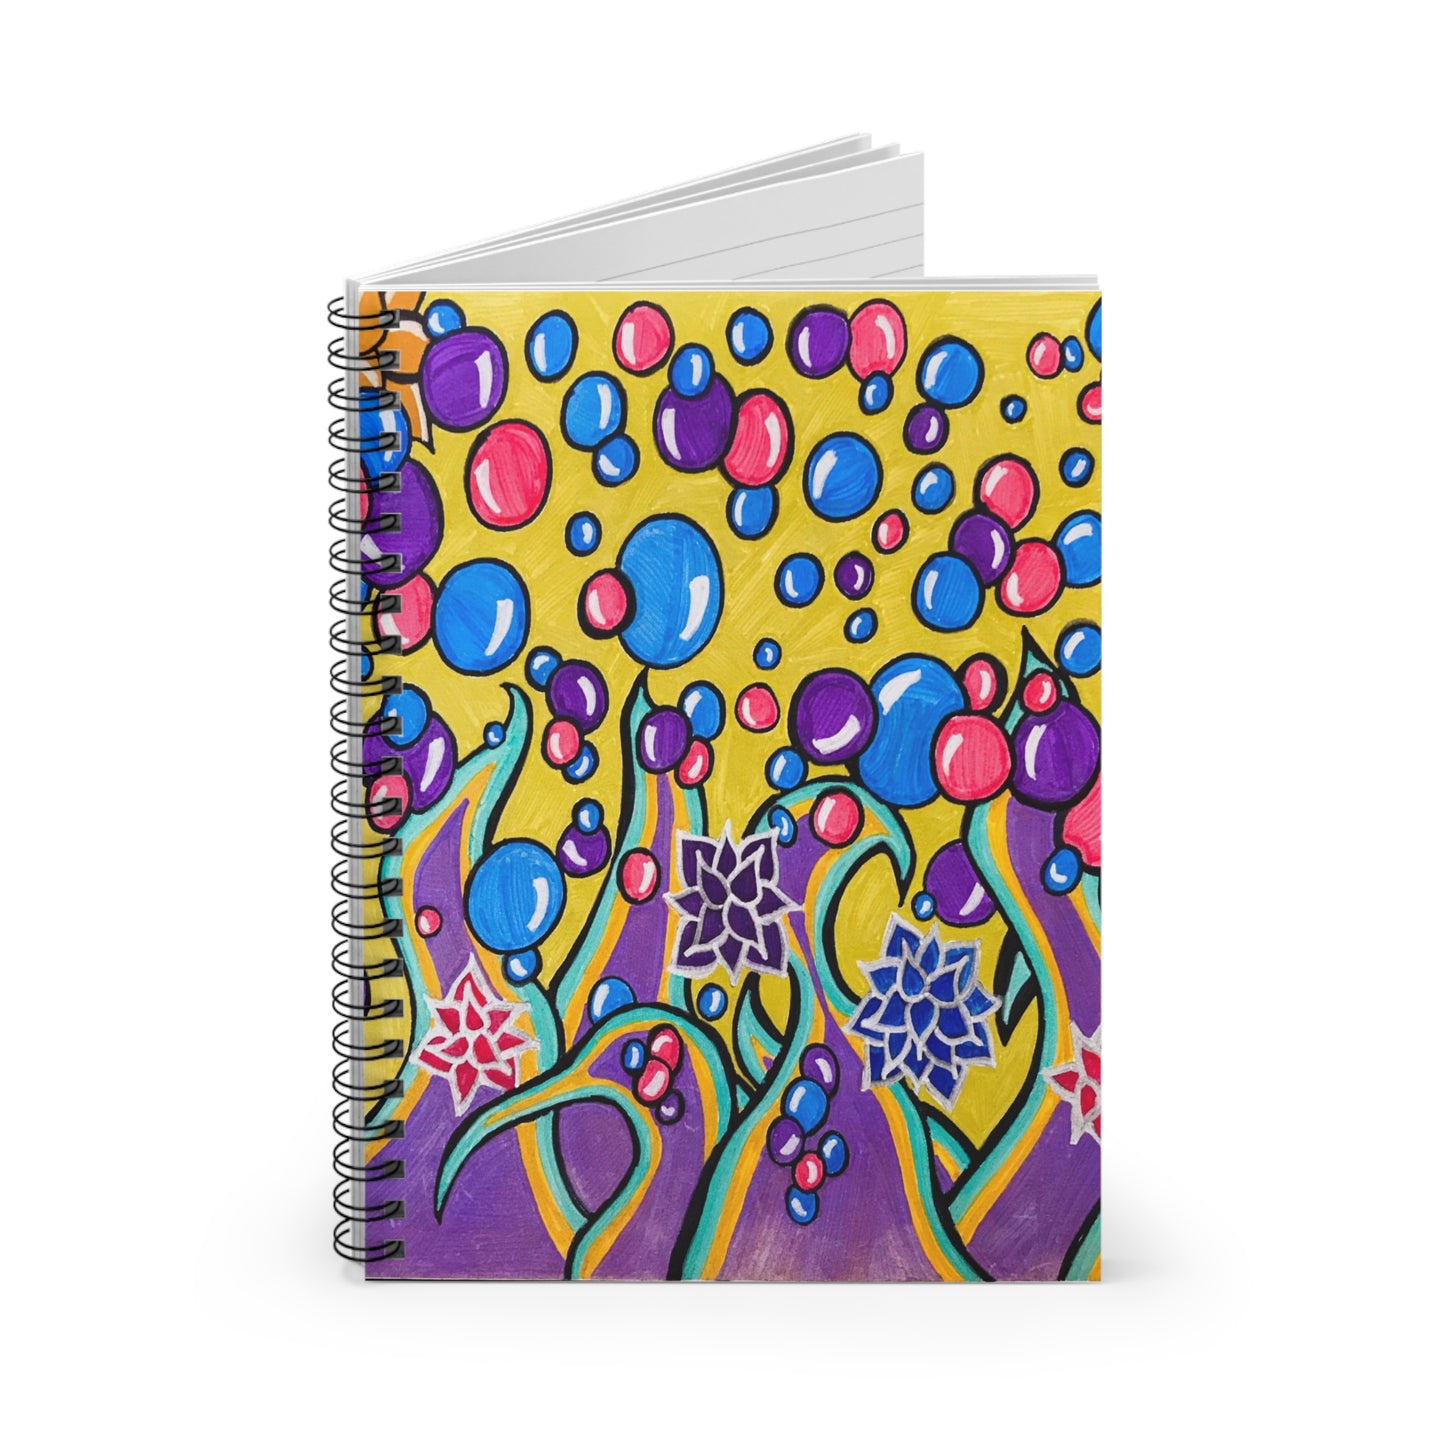 Under the Sea - Spiral Notebook - Ruled Line